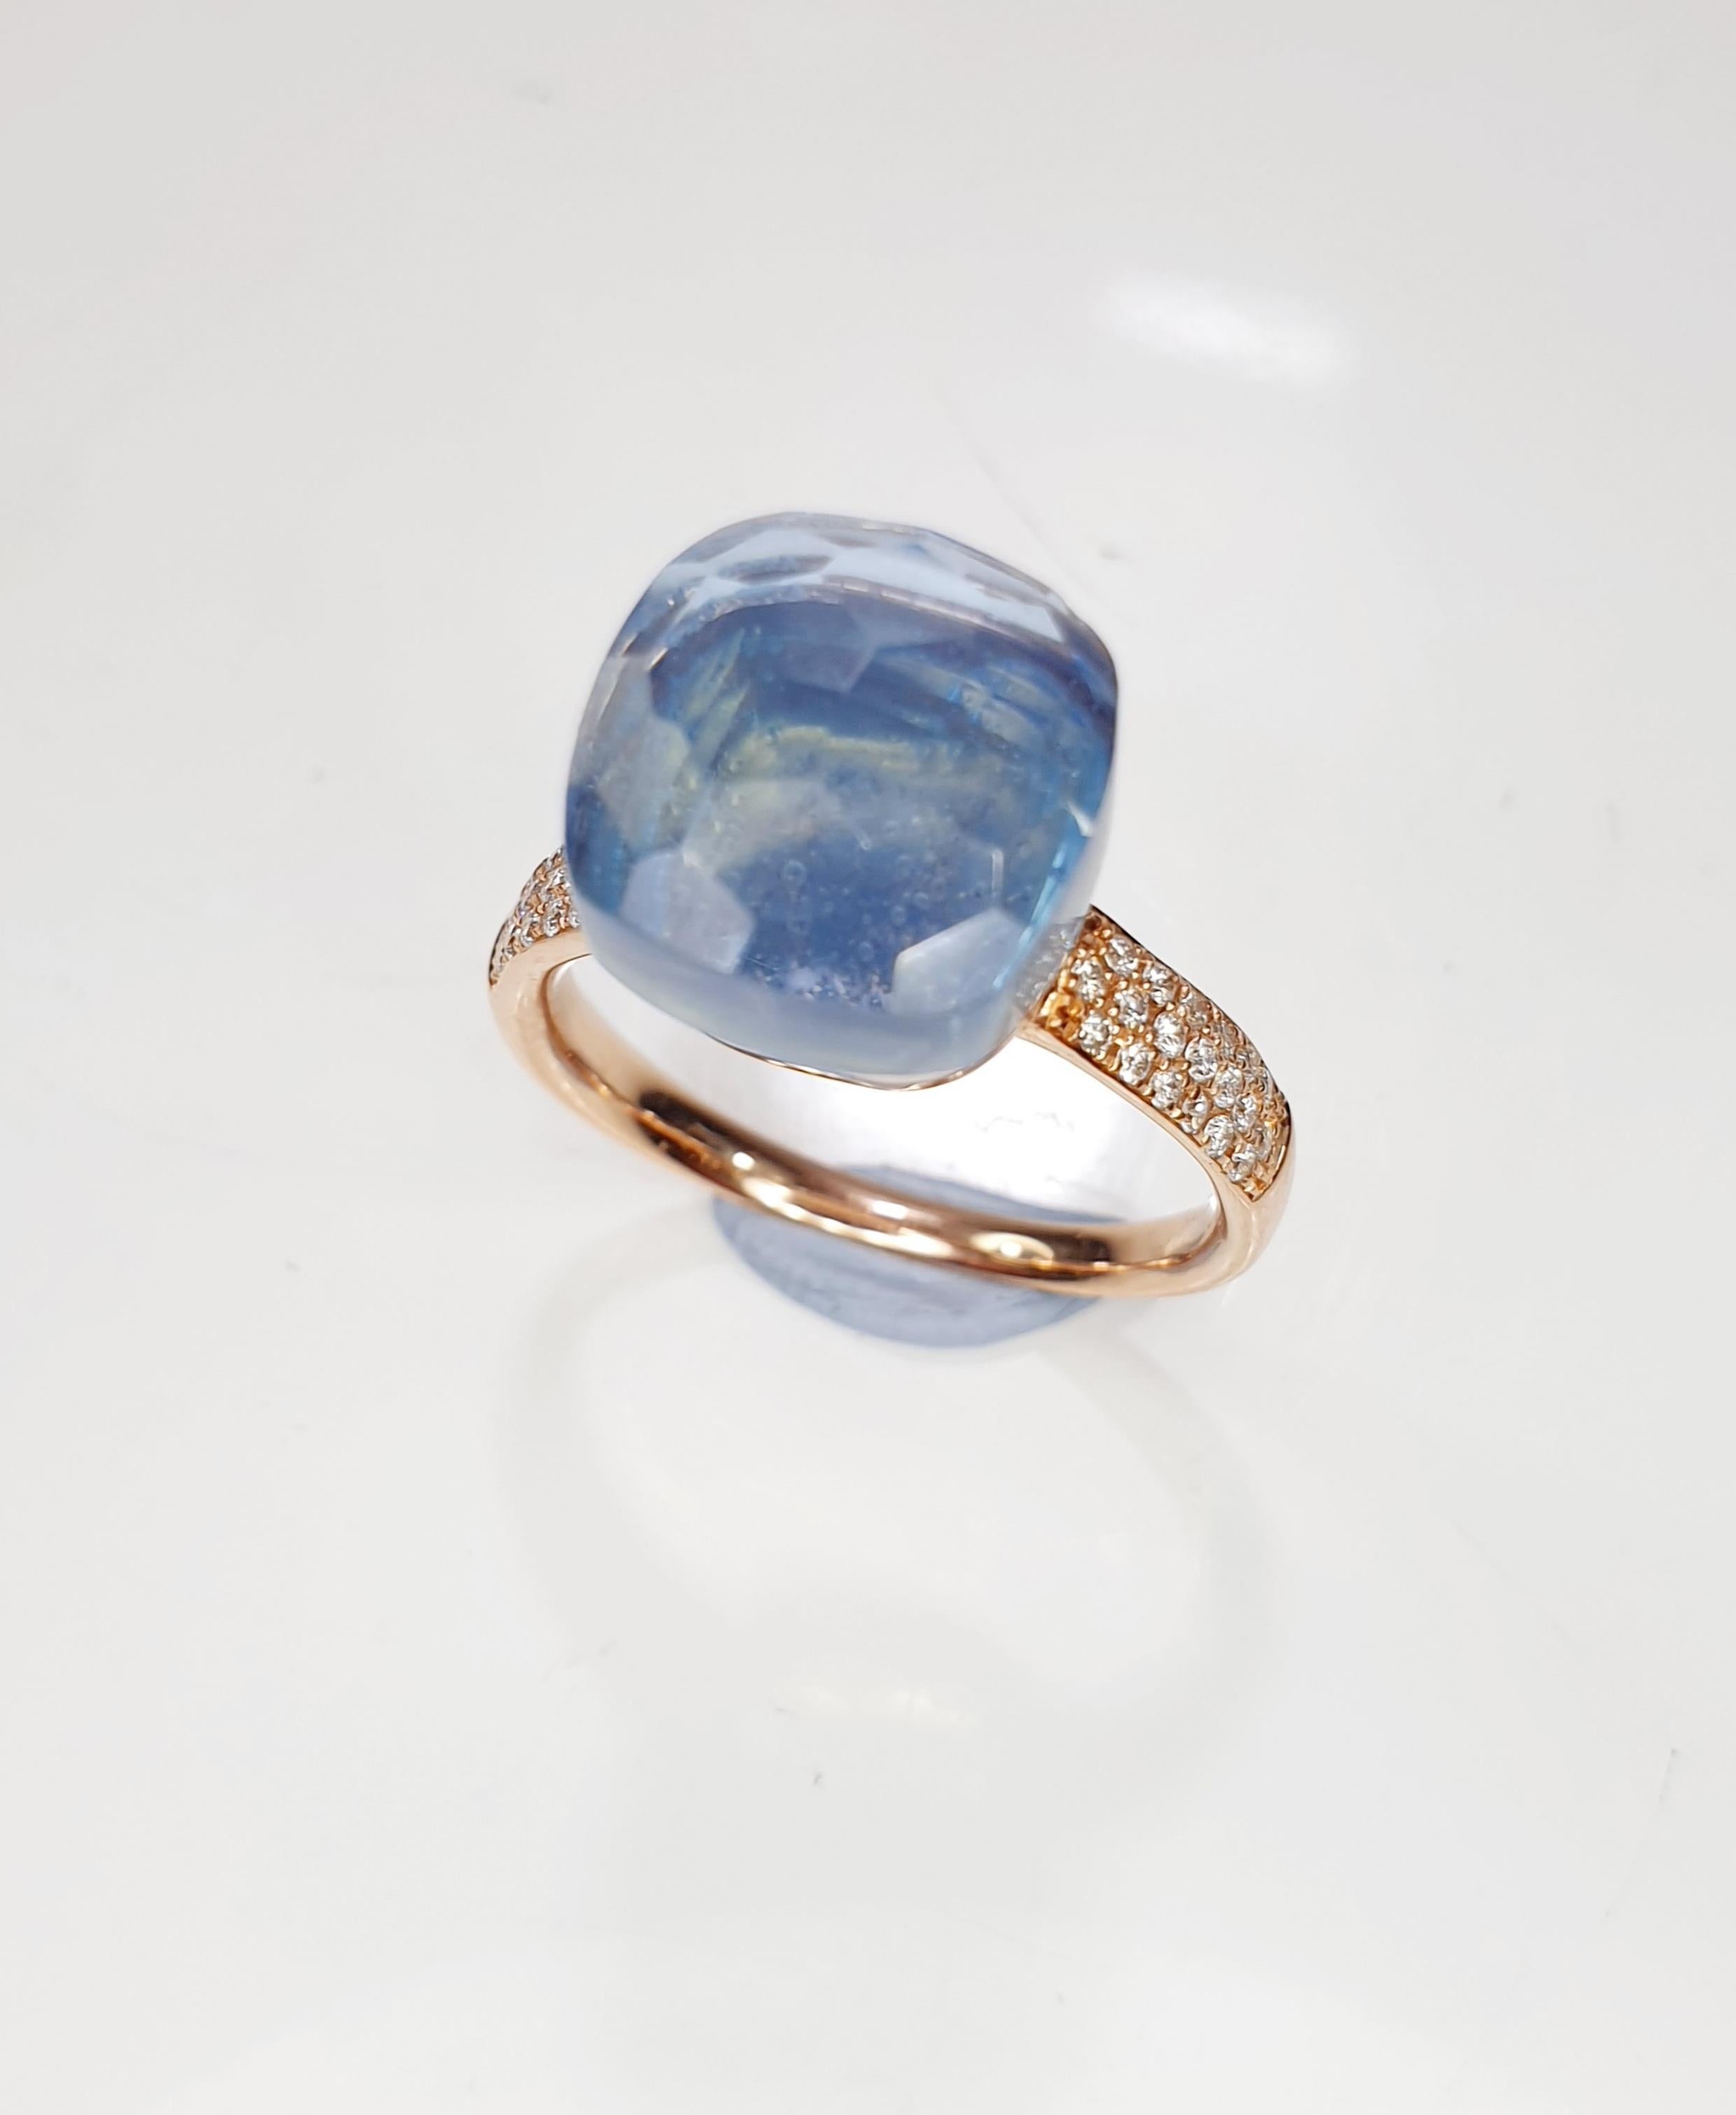 Multifaceted Blue London Topaz  18k  White and Yellow gold  Ring For Sale 3